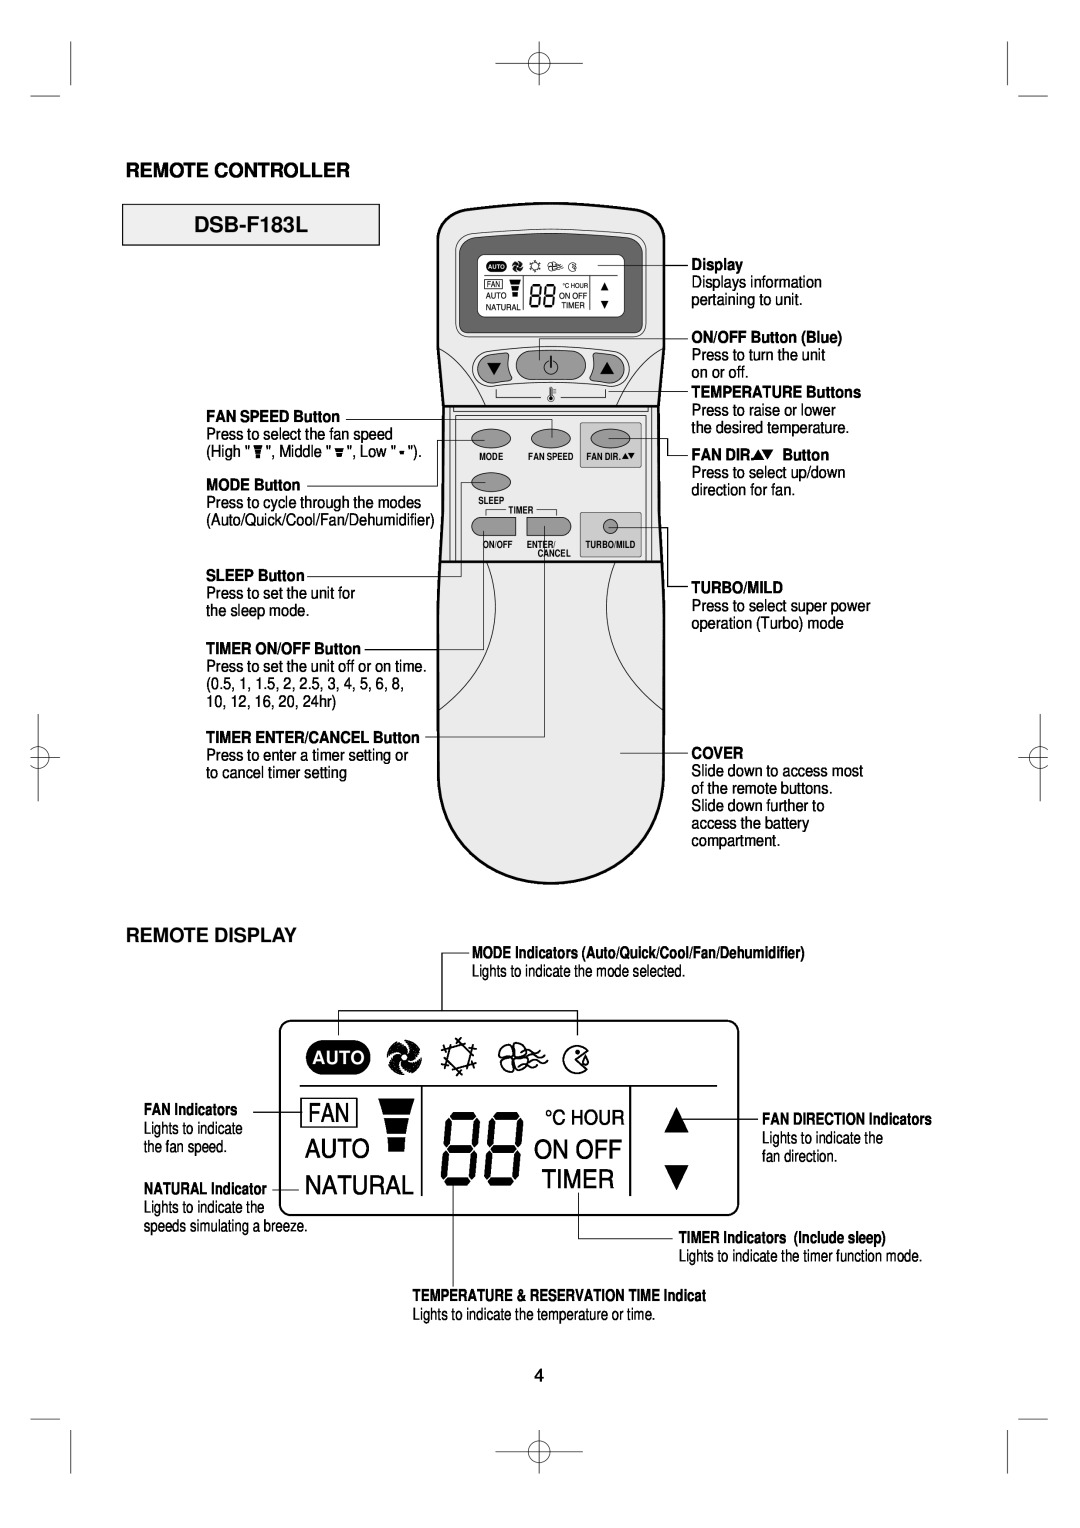 Daewoo DSB-F183L Remote Controller, Remote Display, Auto, FAN SPEED Button, MODE Button, SLEEP Button, TIMER ON/OFF Button 